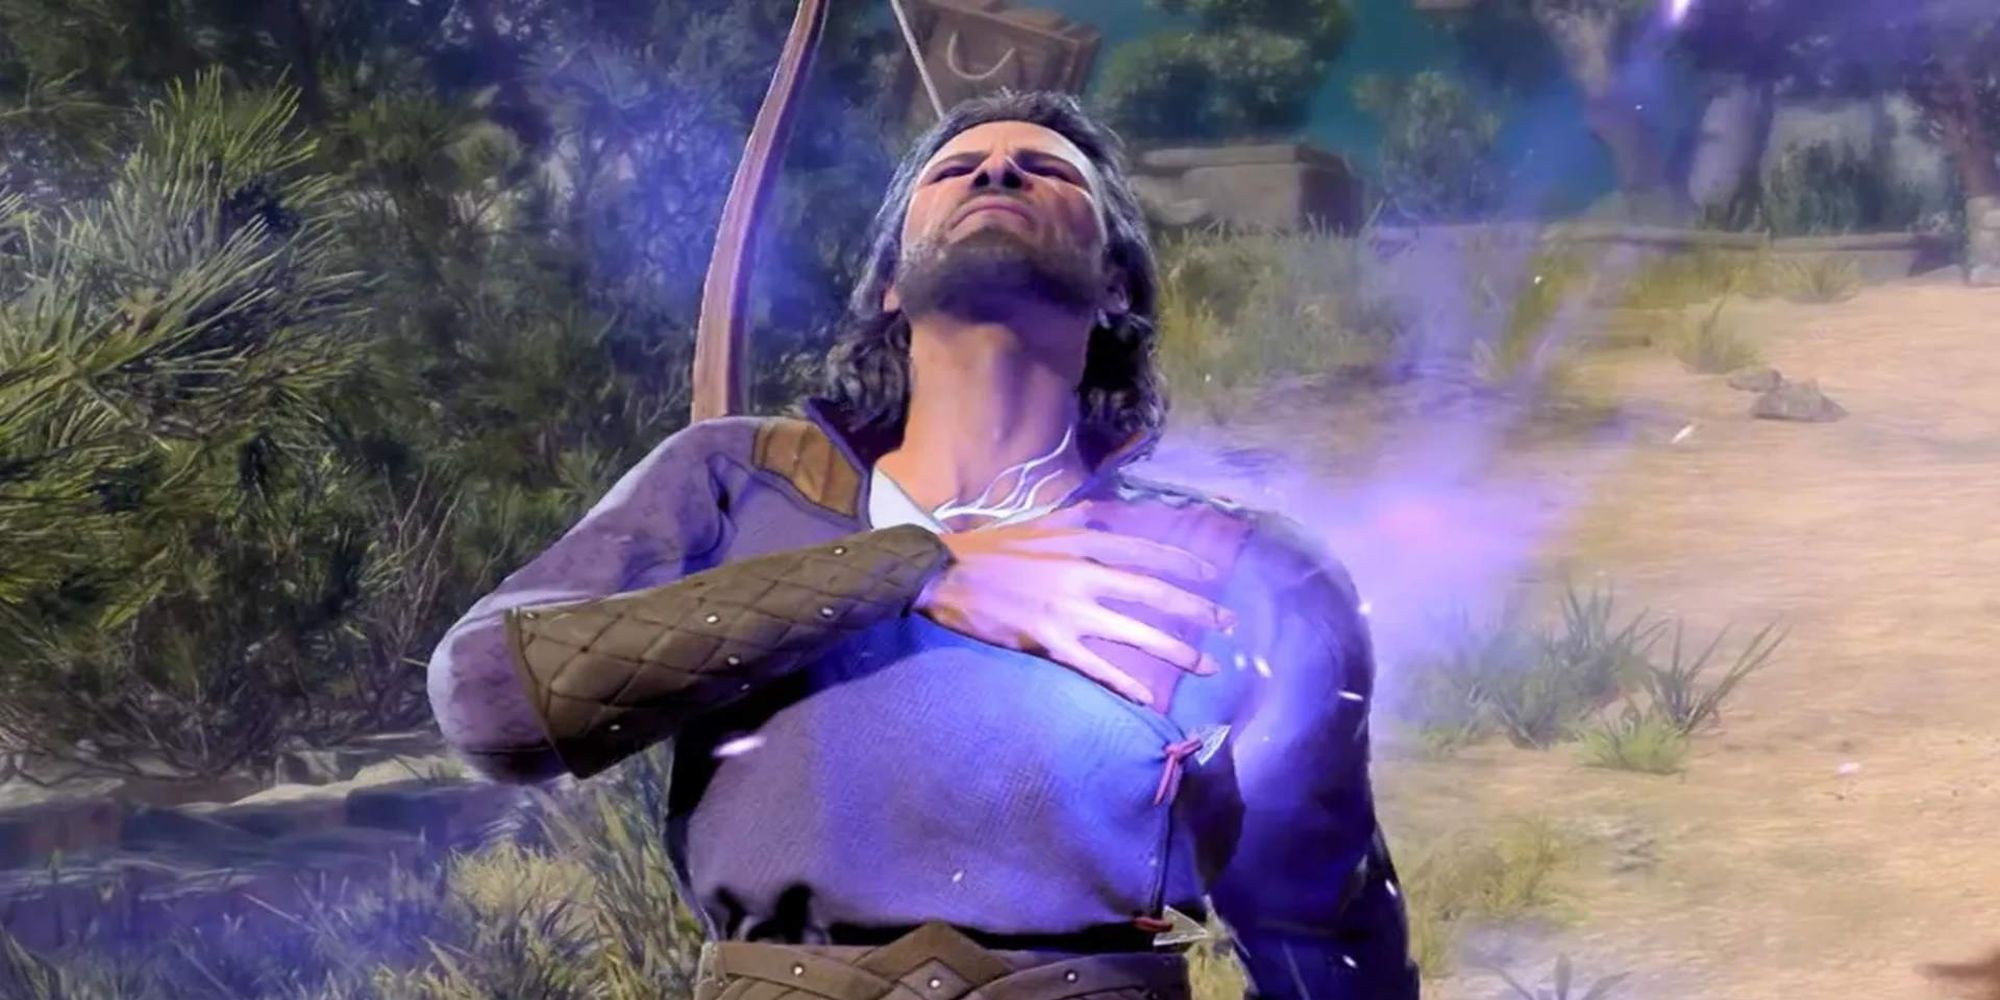 Gale from Baldur's Gate 3 with his hand on his chest, clearly in pain. He is glowing purple